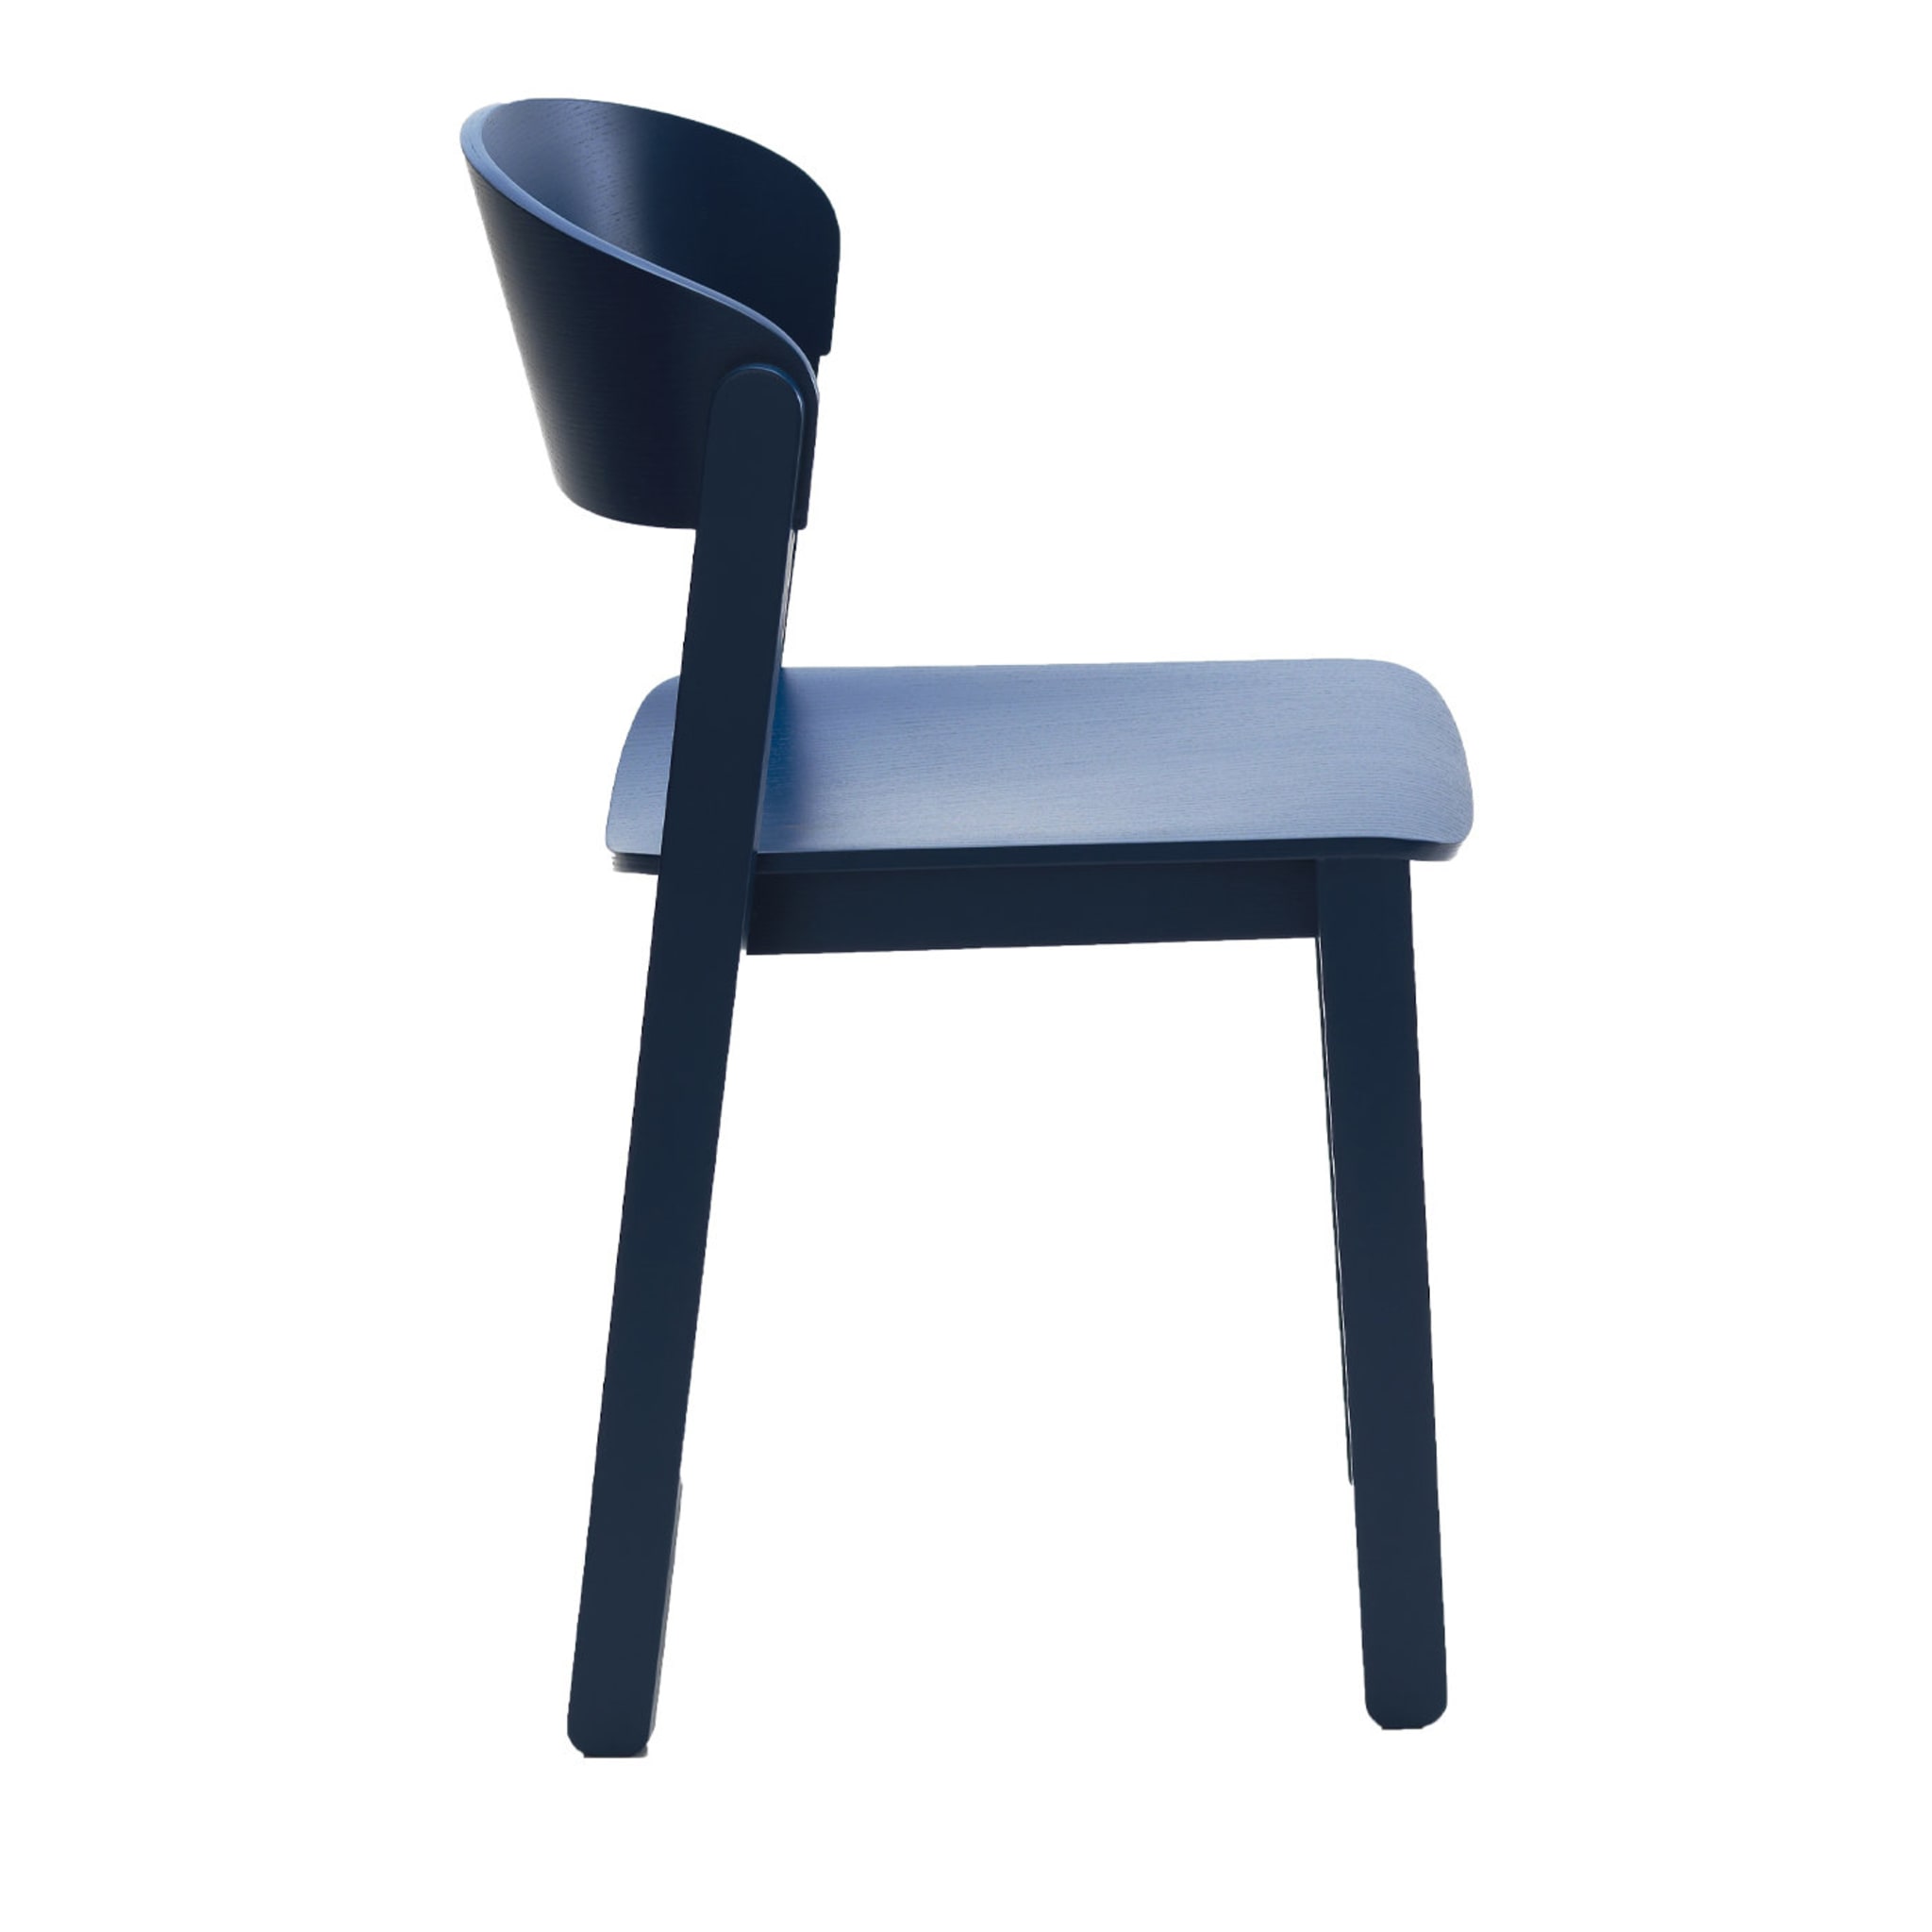 Set of 2 Pur Chairs by Note Design Studio - Main view